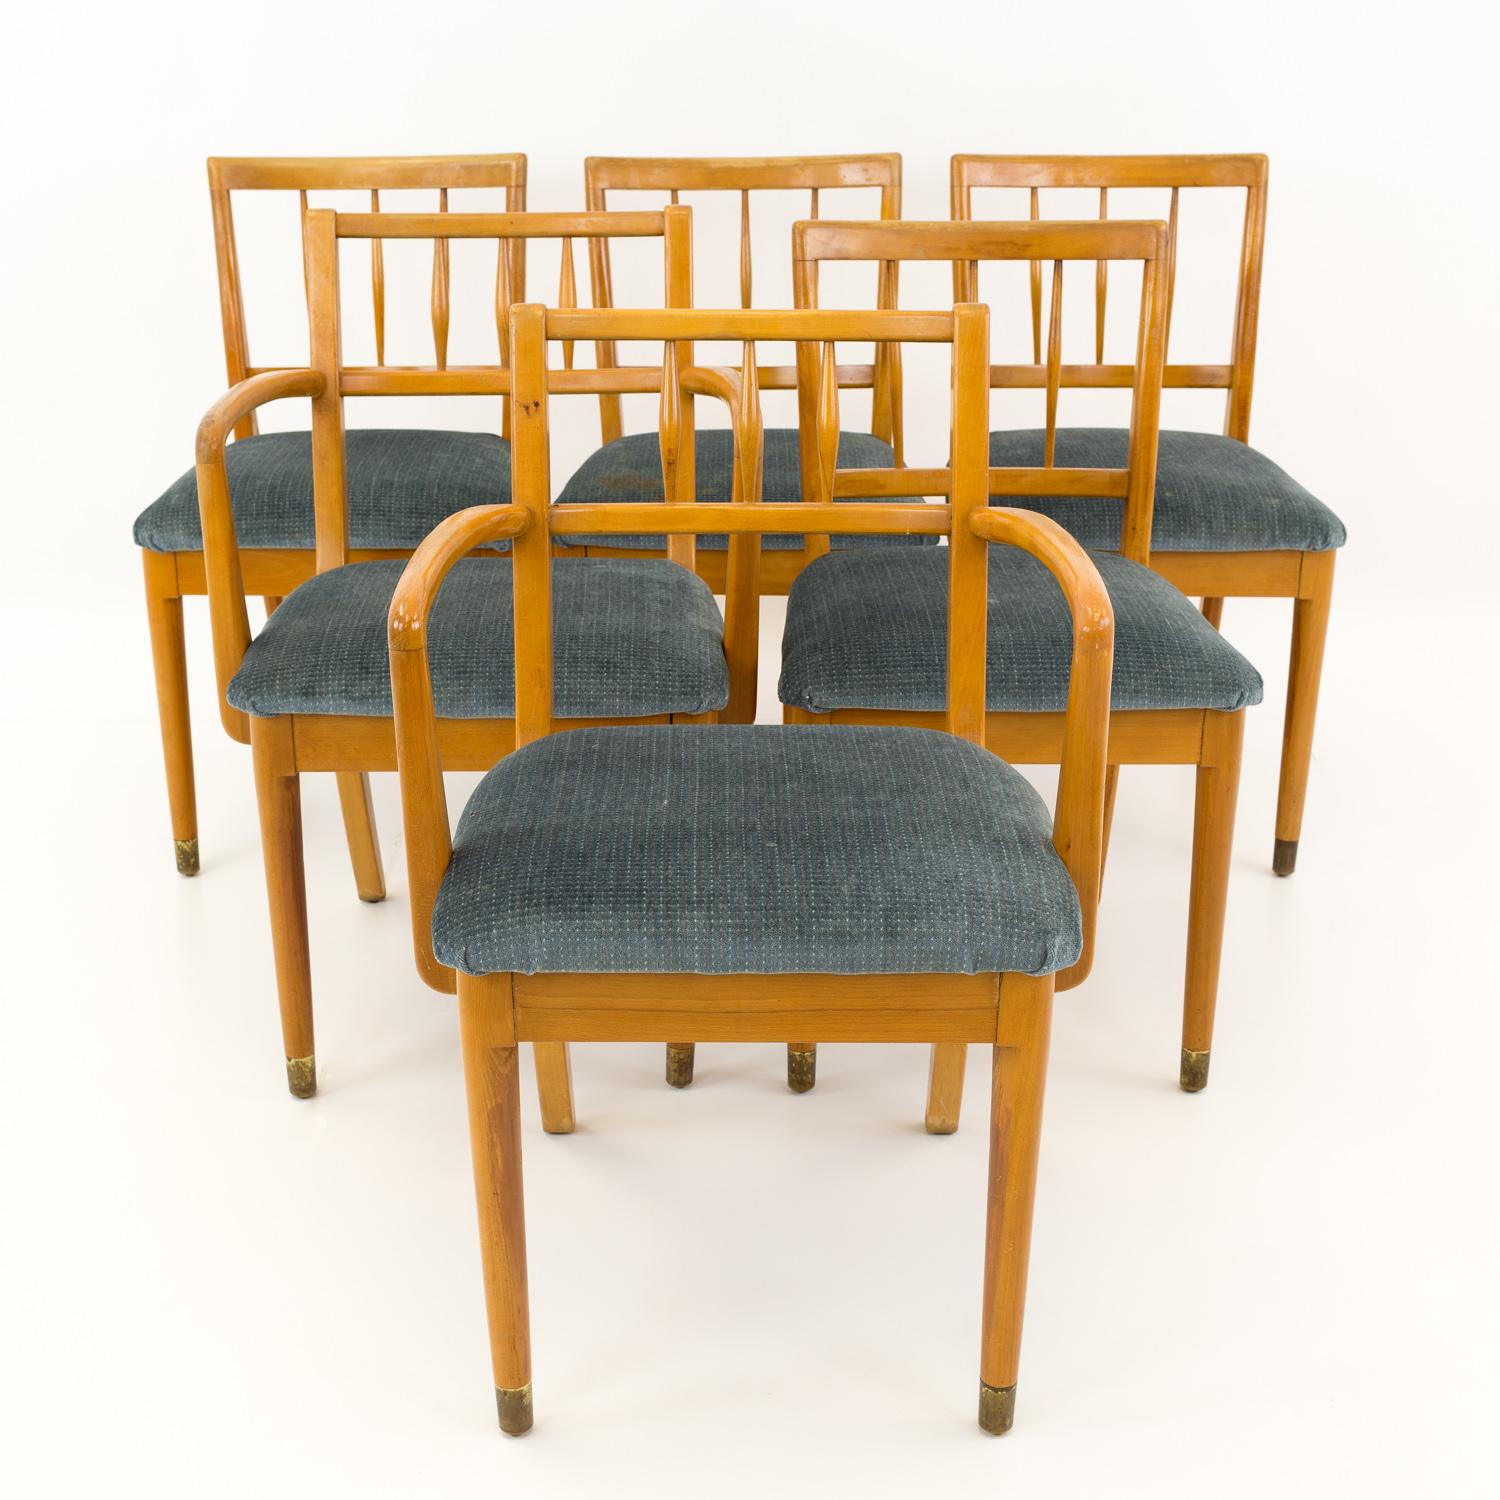 Milo Baughman for Drexel New Todays living midcentury spice color dining chairs - set of 6
Each chair is 21.25 wide x 21.5 deep x 32.5 high

All pieces of furniture can be had in what we call restored vintage condition. This means the piece is